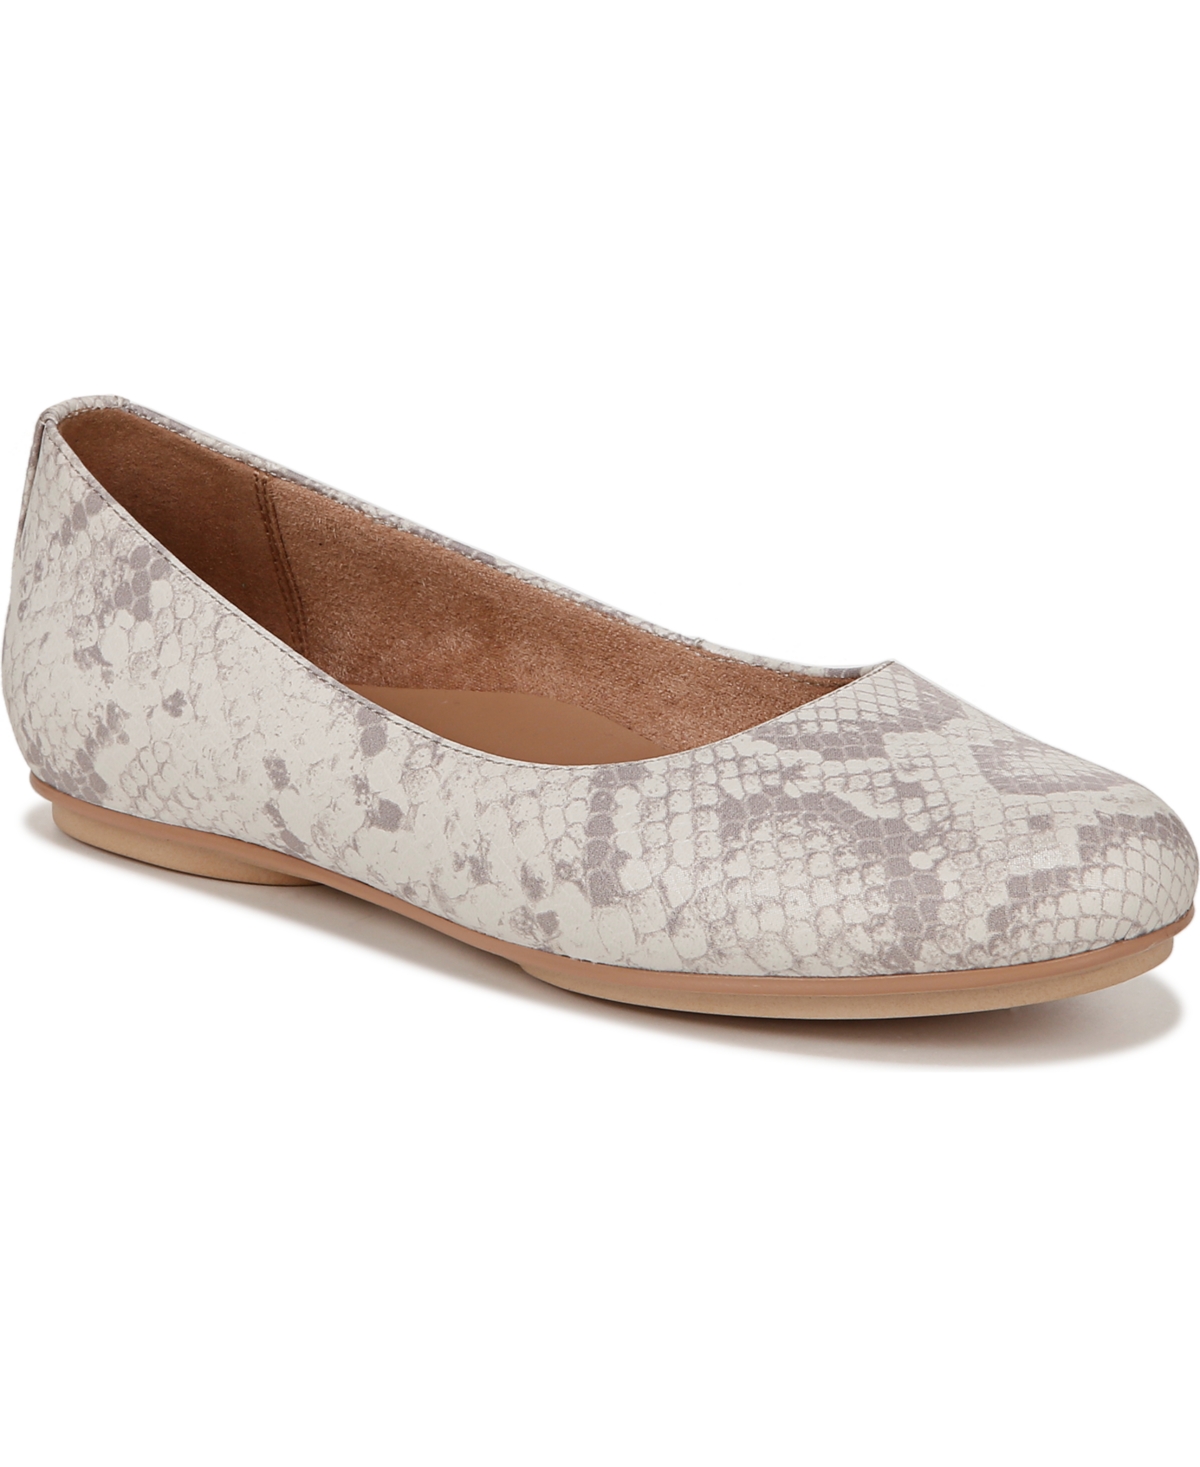 Naturalizer Maxwell Ballet Flats In White Multi Snake Embossed Leather